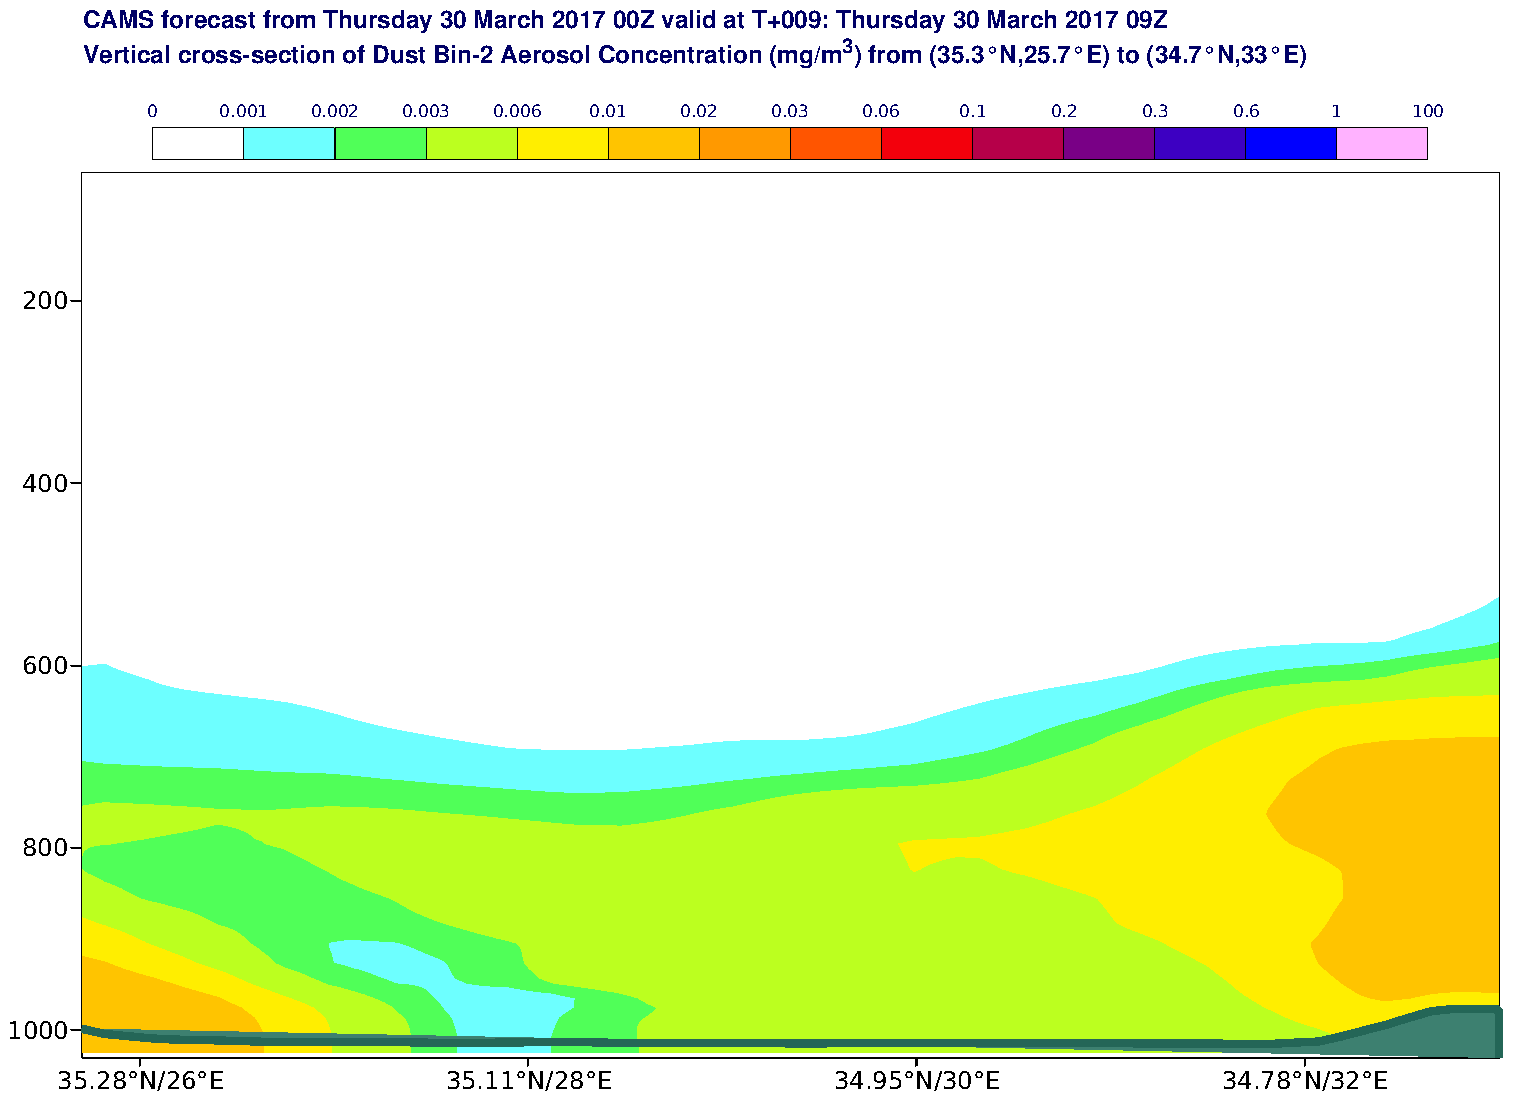 Vertical cross-section of Dust Bin-2 Aerosol Concentration (mg/m3) valid at T9 - 2017-03-30 09:00